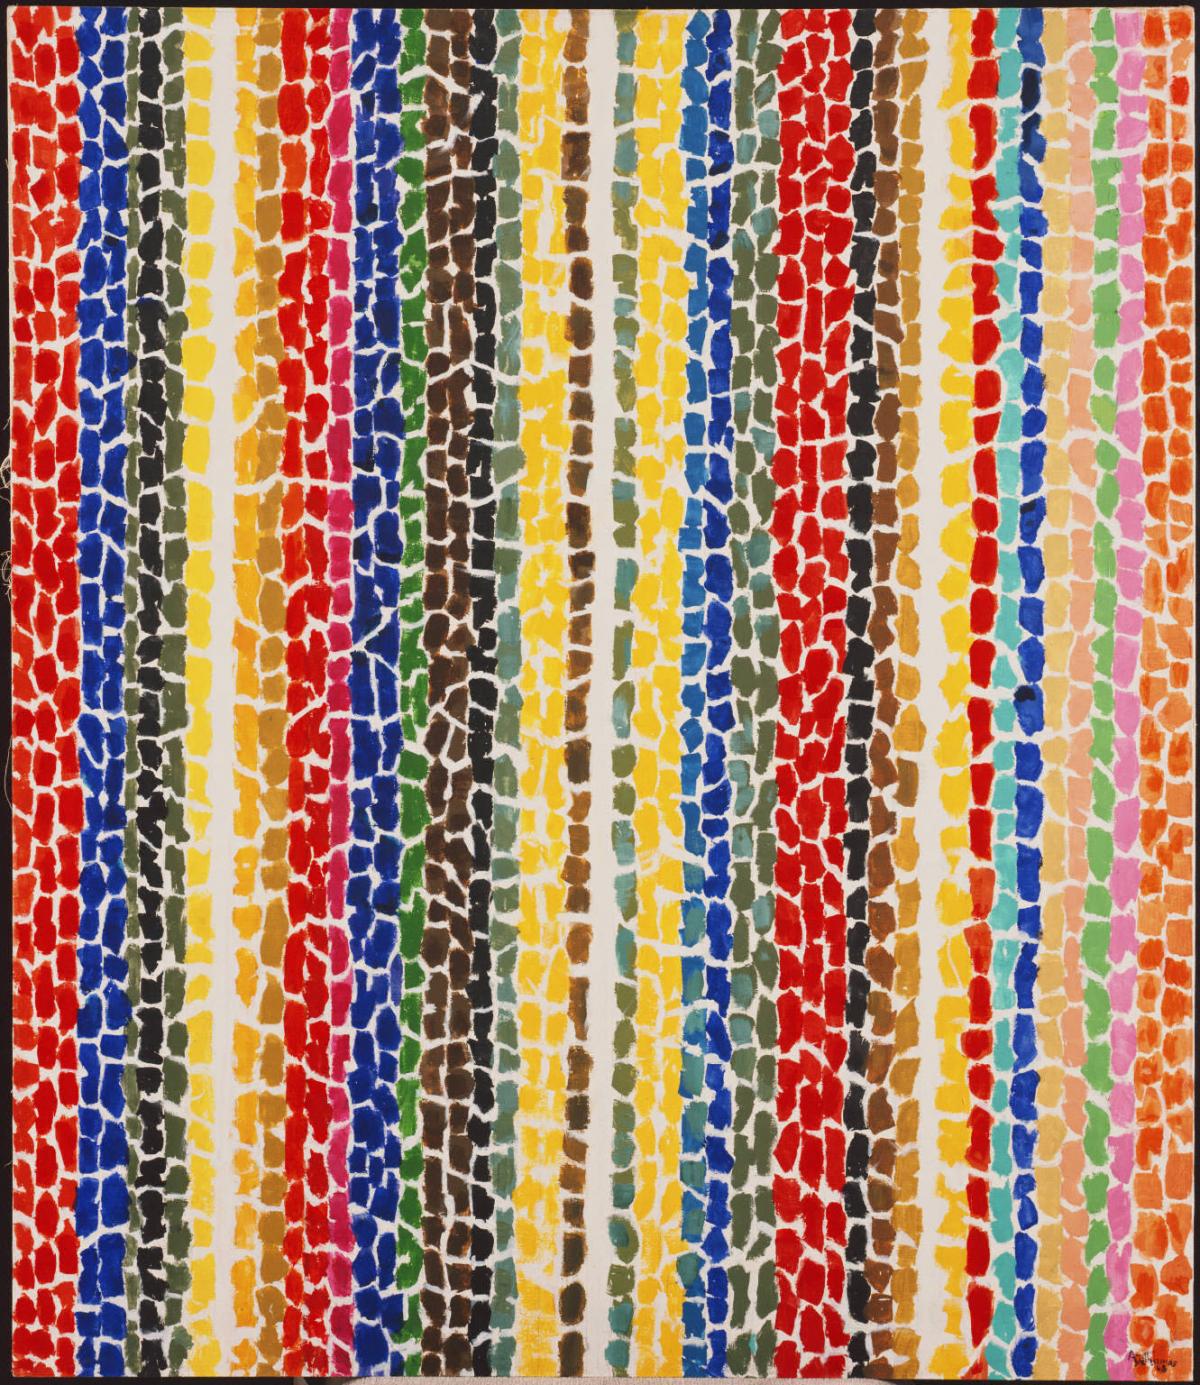 vertical mosaic-style stripes in red, blue, green, and yellow